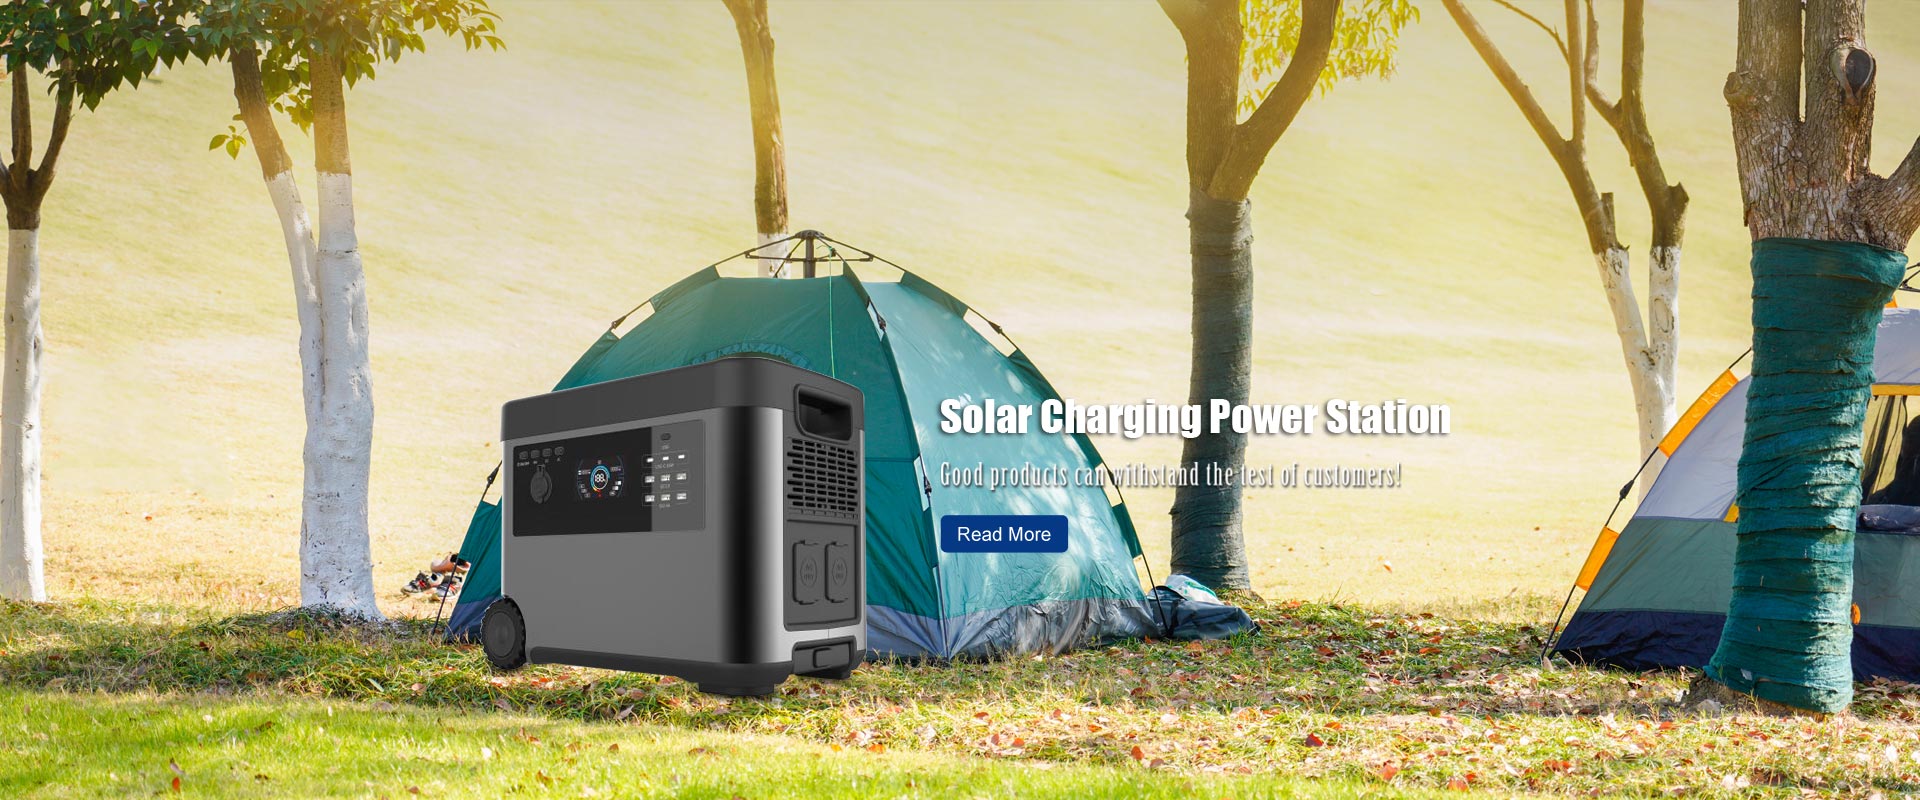 Solar Charging Power Station Manufacturers and Suppliers